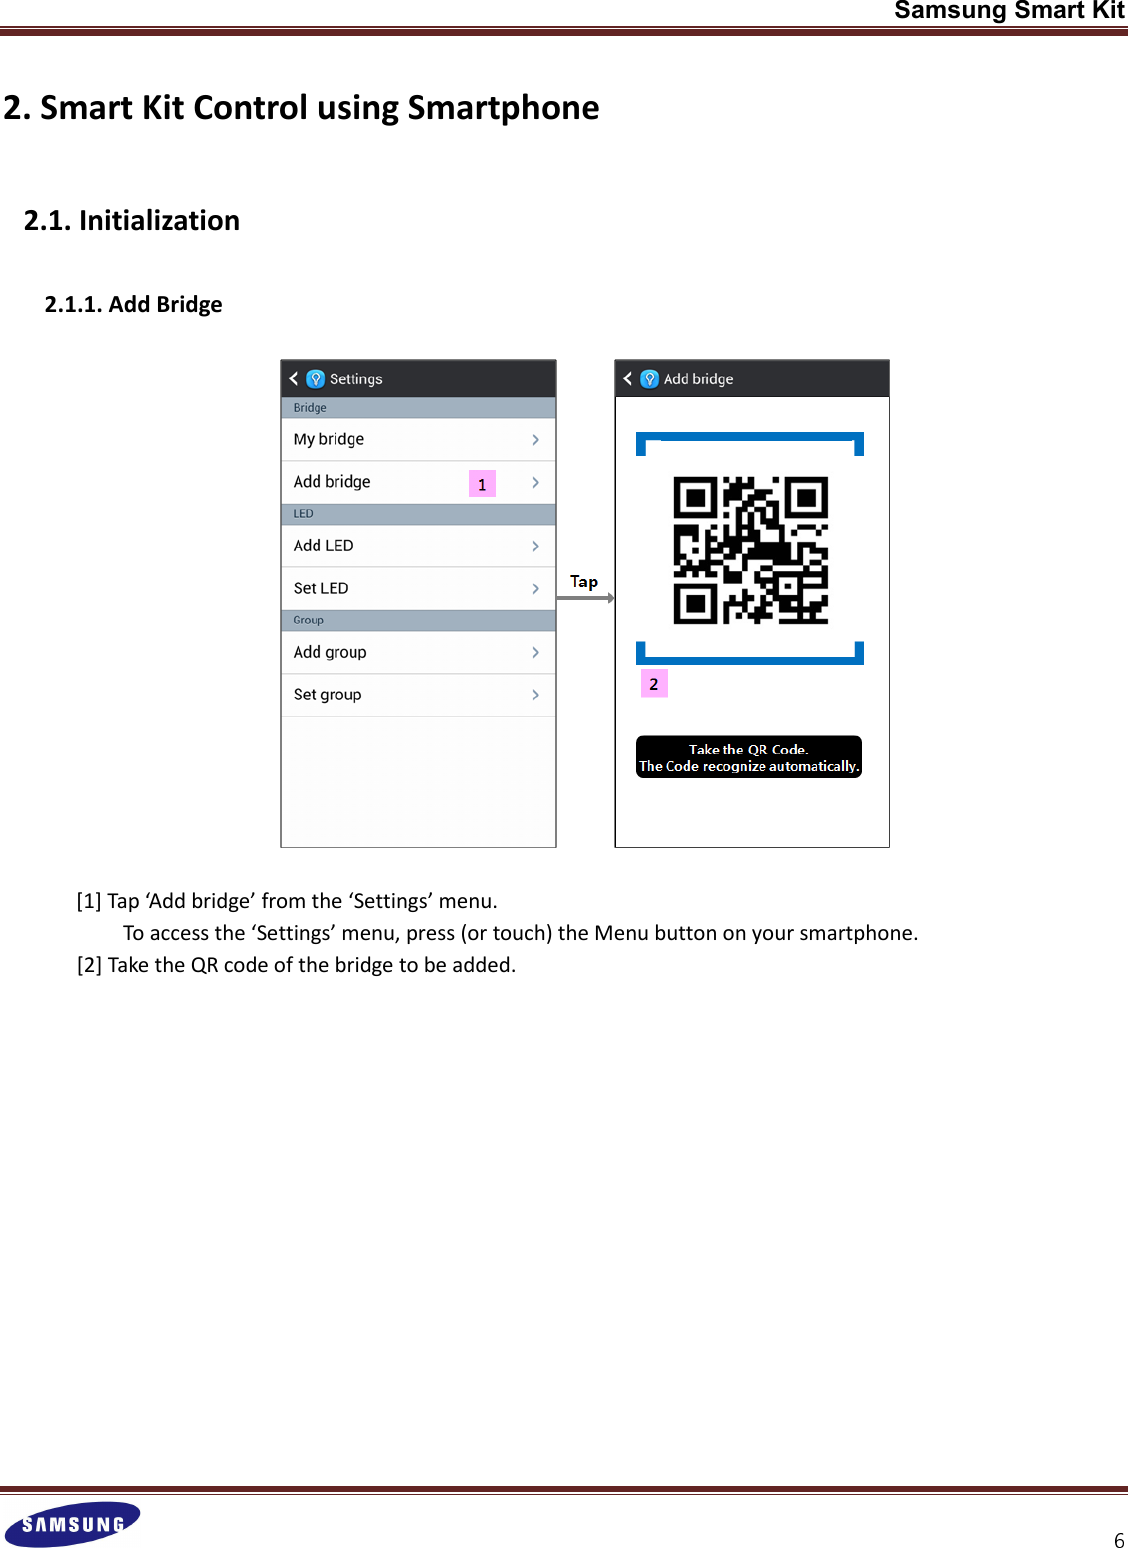 Samsung Smart Kit  2. Smart Kit Control using Smartphone   2.1. Initialization  2.1.1. Add Bridge      [1] Tap ‘Add bridge’ from the ‘Settings’ menu. To access the ‘Settings’ menu, press (or touch) the Menu button on your smartphone. [2] Take the QR code of the bridge to be added.            